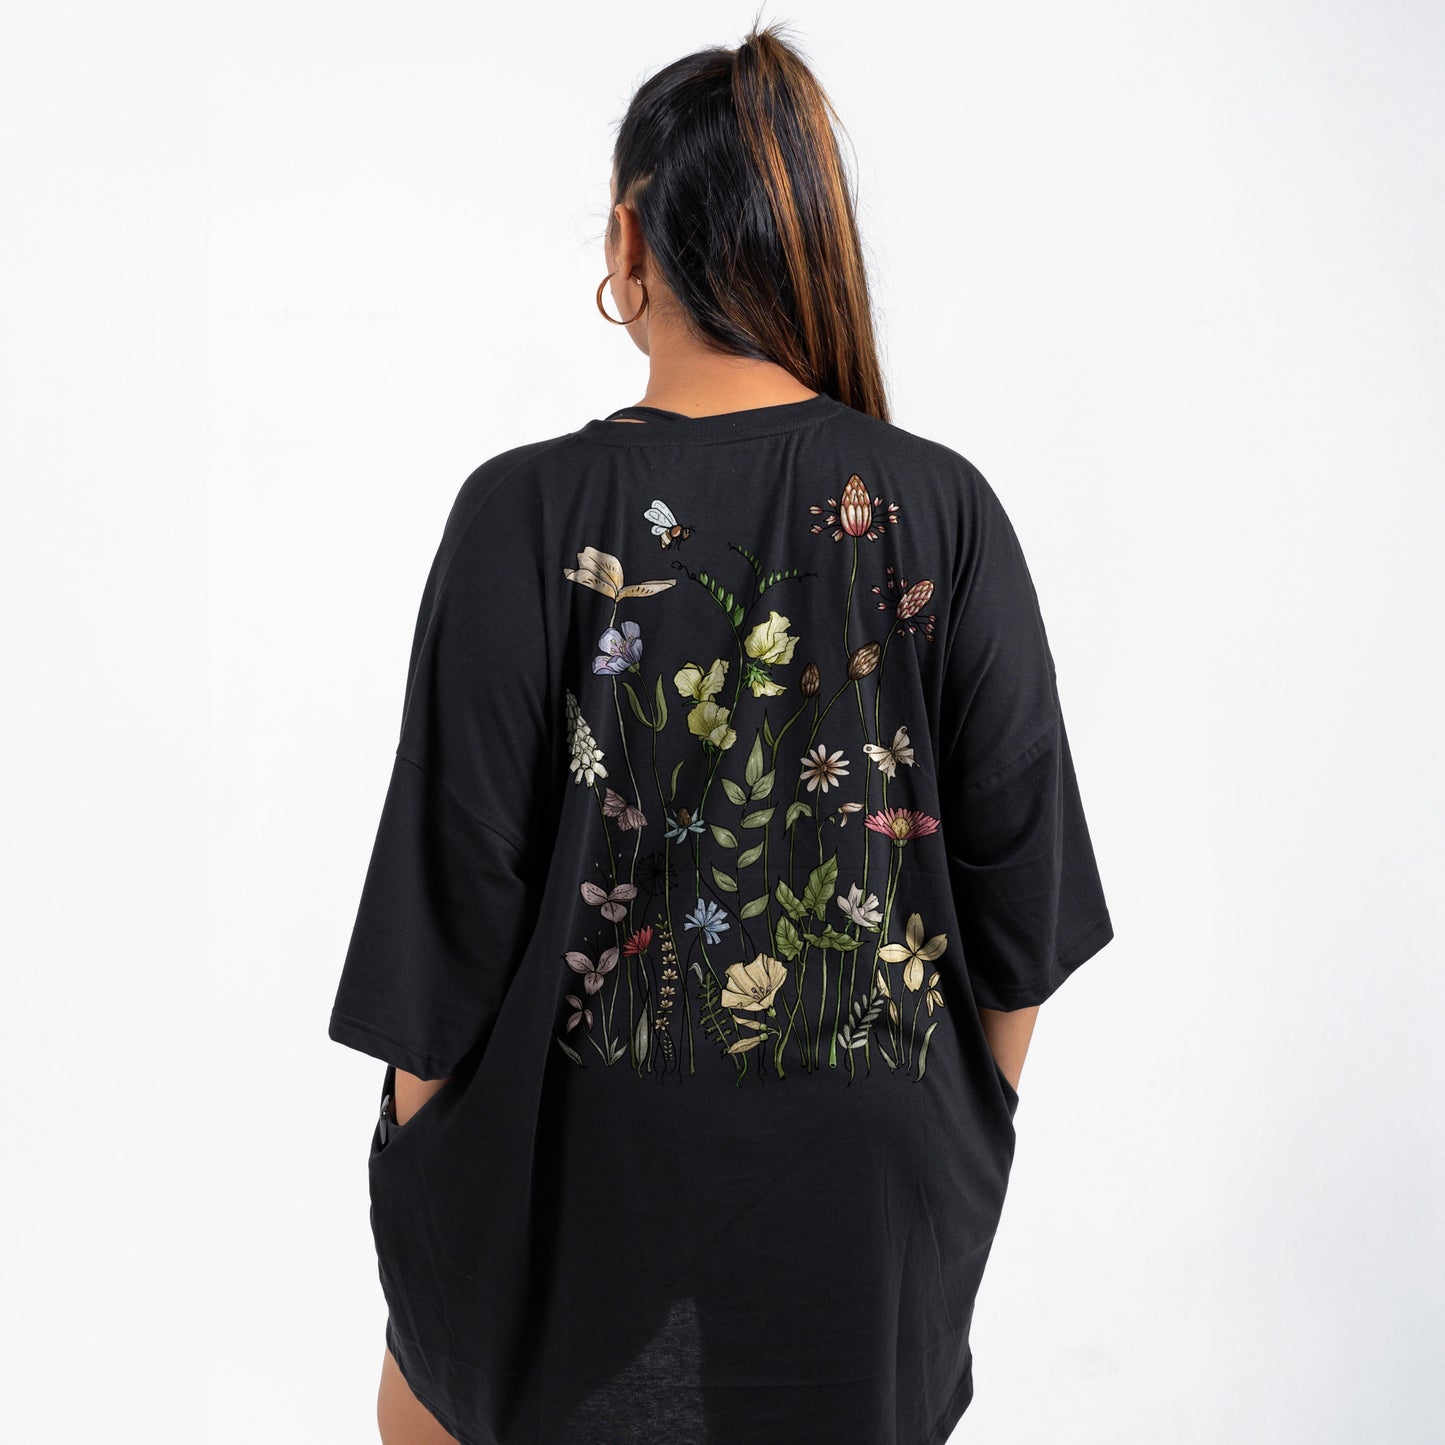 Black floral relax tee back